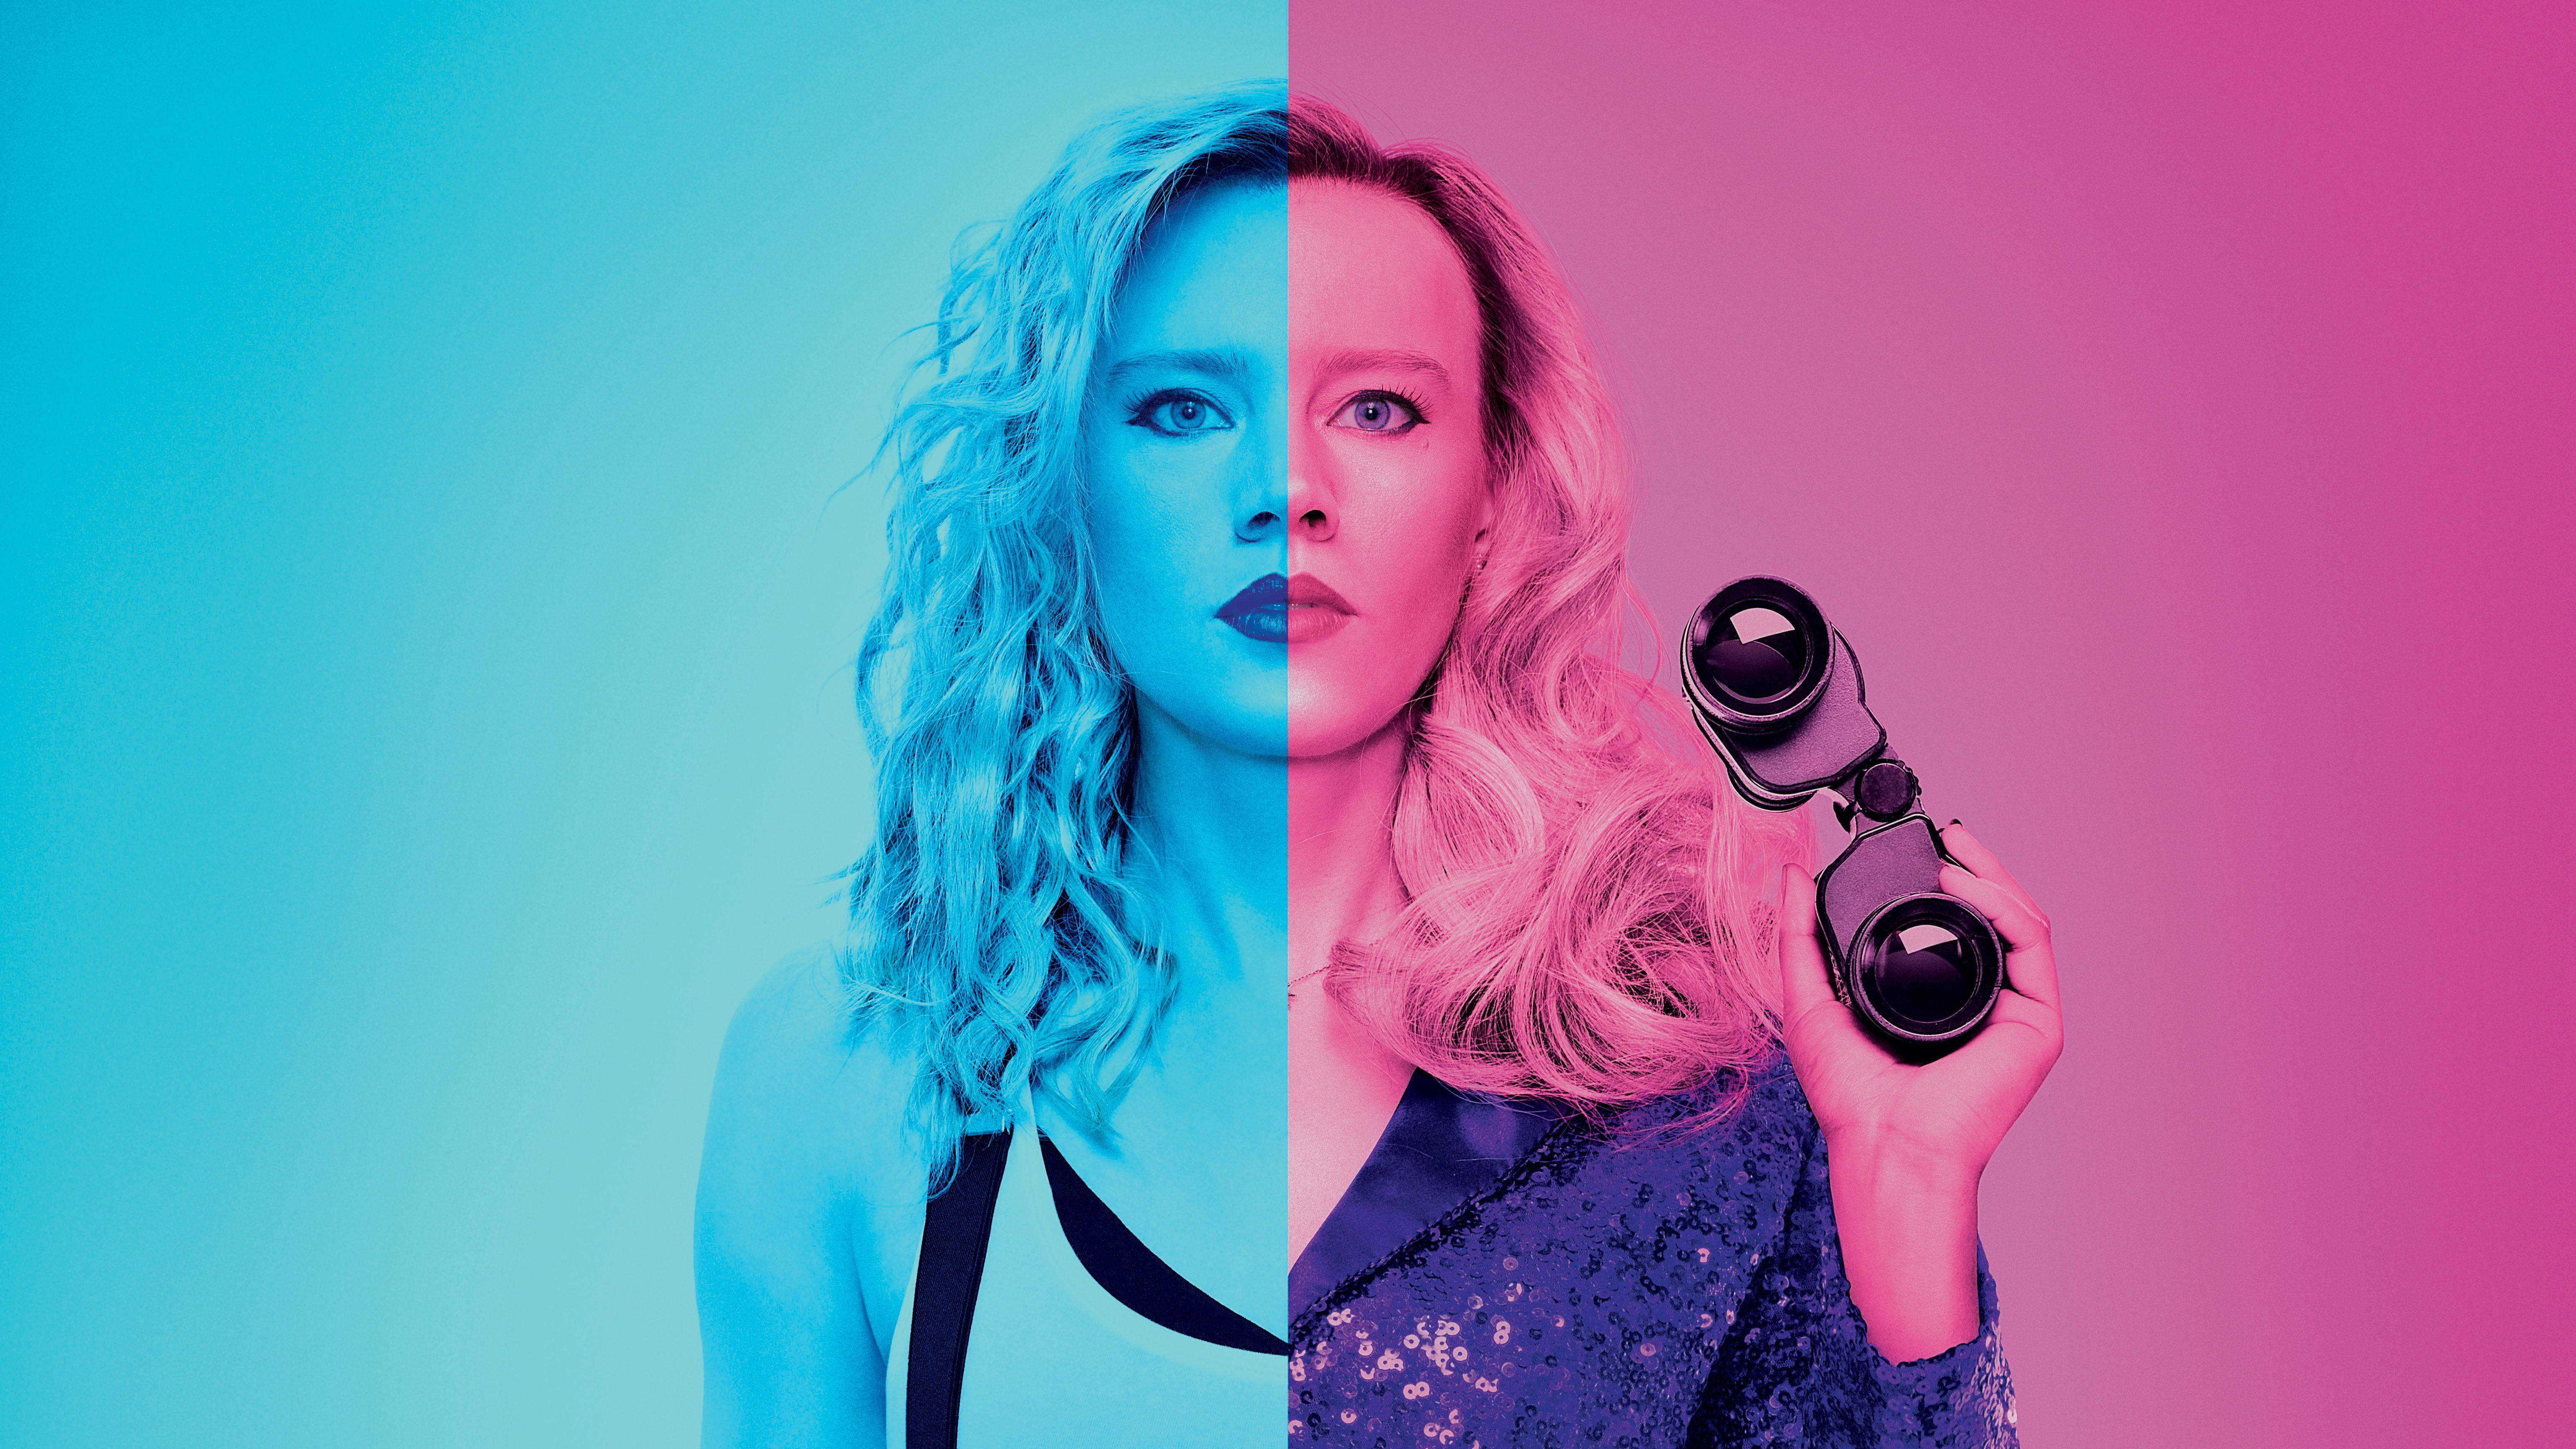 The Spy Who Dumped Me Kate Mckinnon 2018 Wallpapers